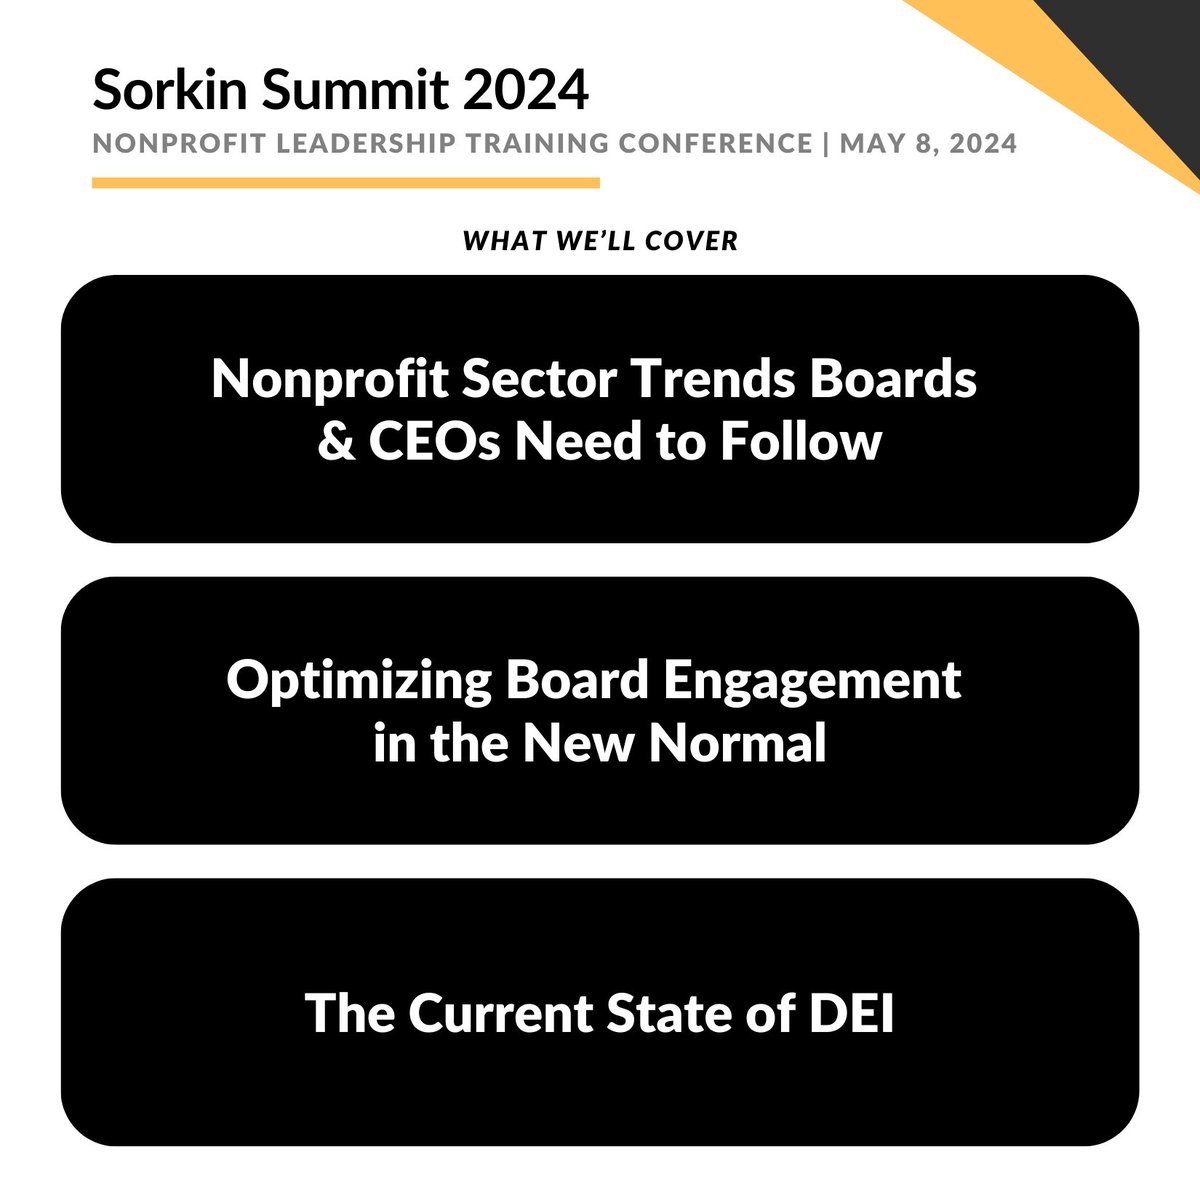 Interested in becoming a more effective nonprofit leader? Register for the Sorkin Summit and join fellow nonprofit leaders and board members for a master class of cutting-edge insights and best practices to level up your board. Get your tickets: compassprobono.org/sorkin-summit/